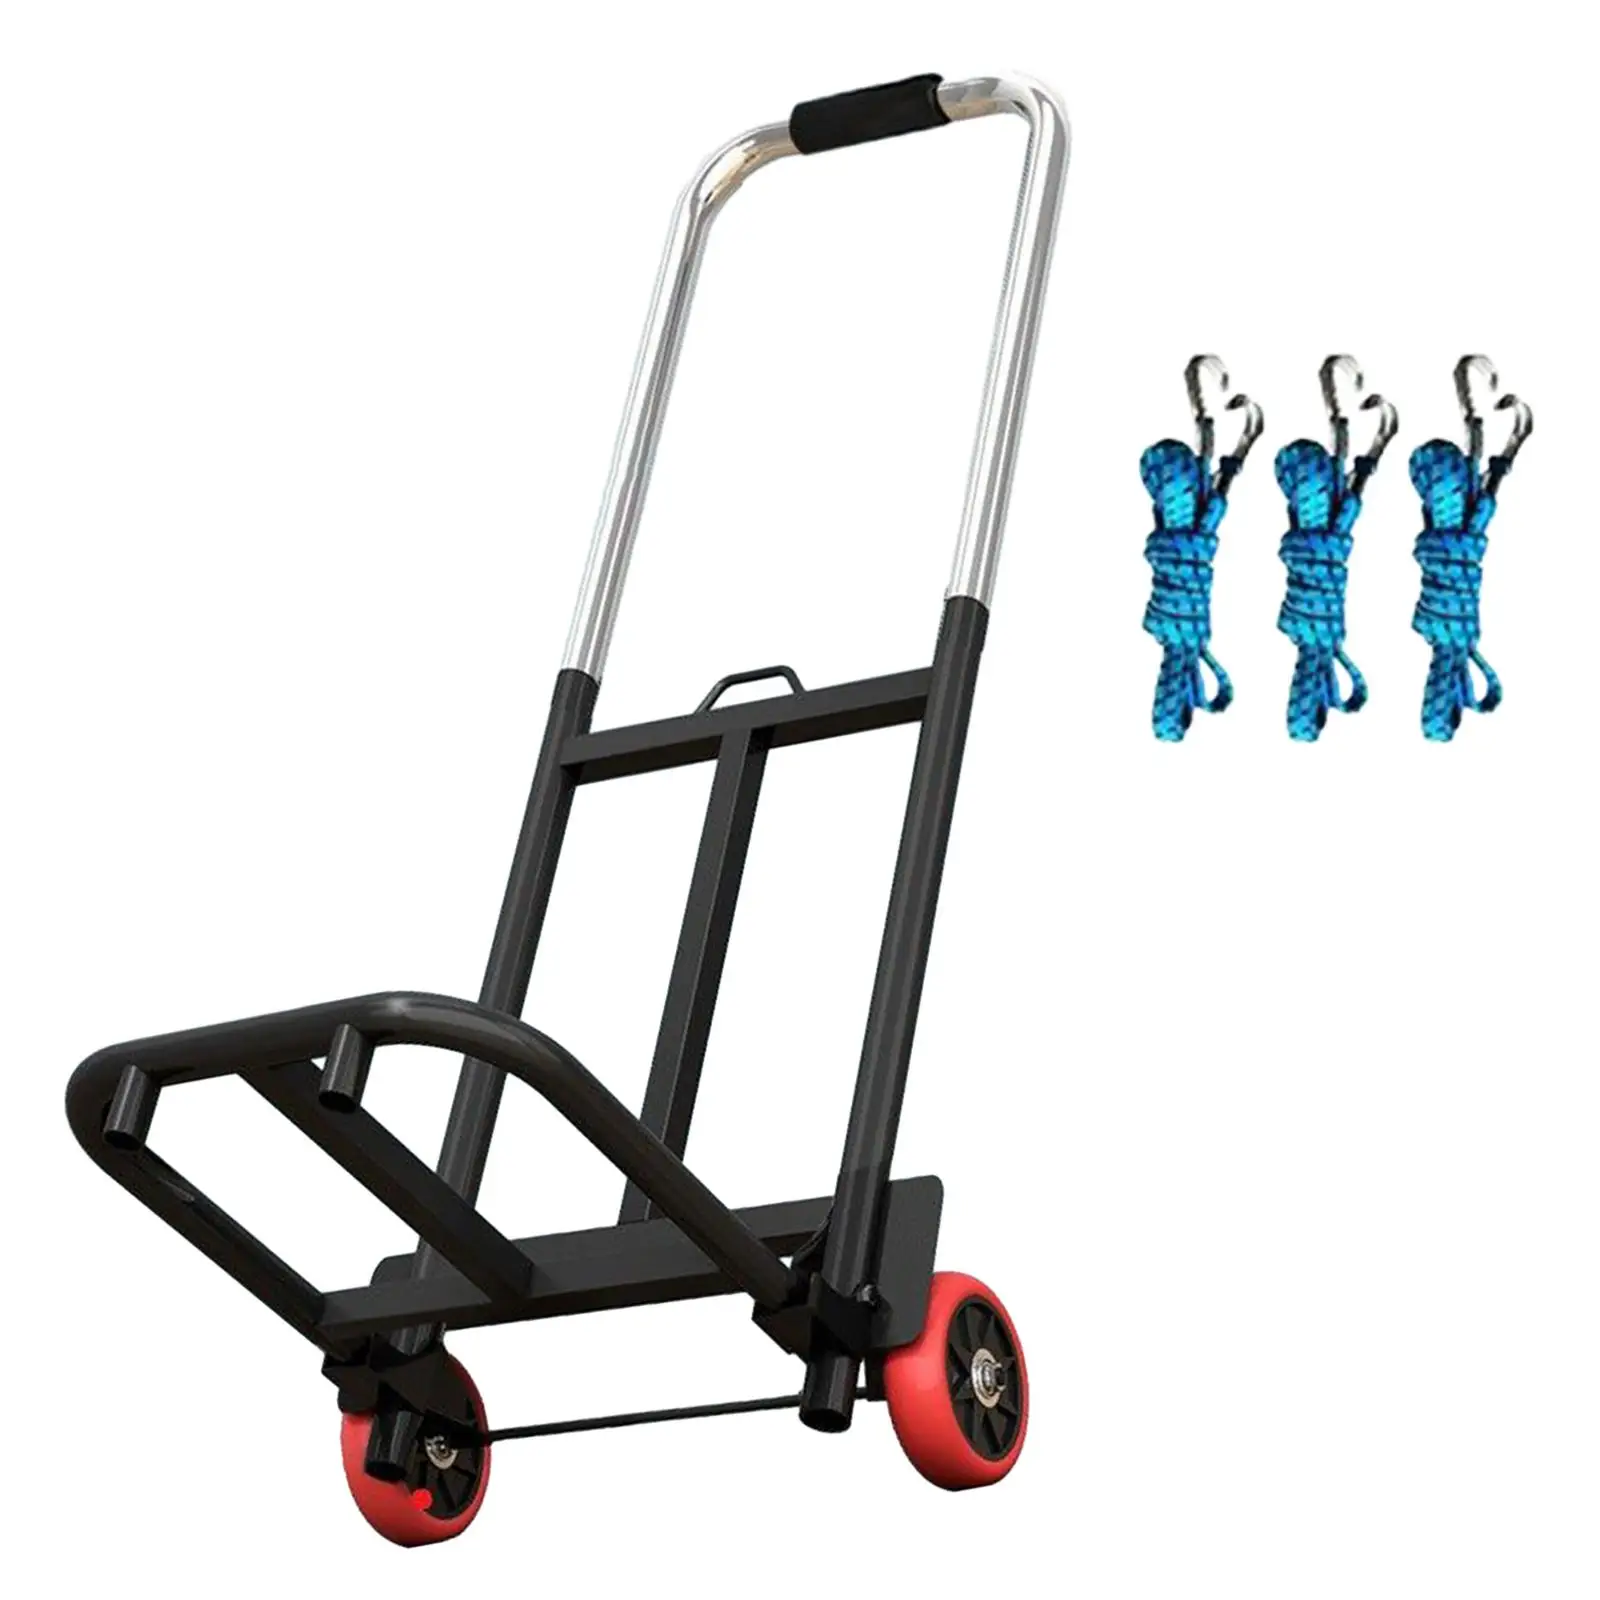 Foldable Hand Truck Luggage Hand Cart Sturdy Adjustable Handle for Travelers